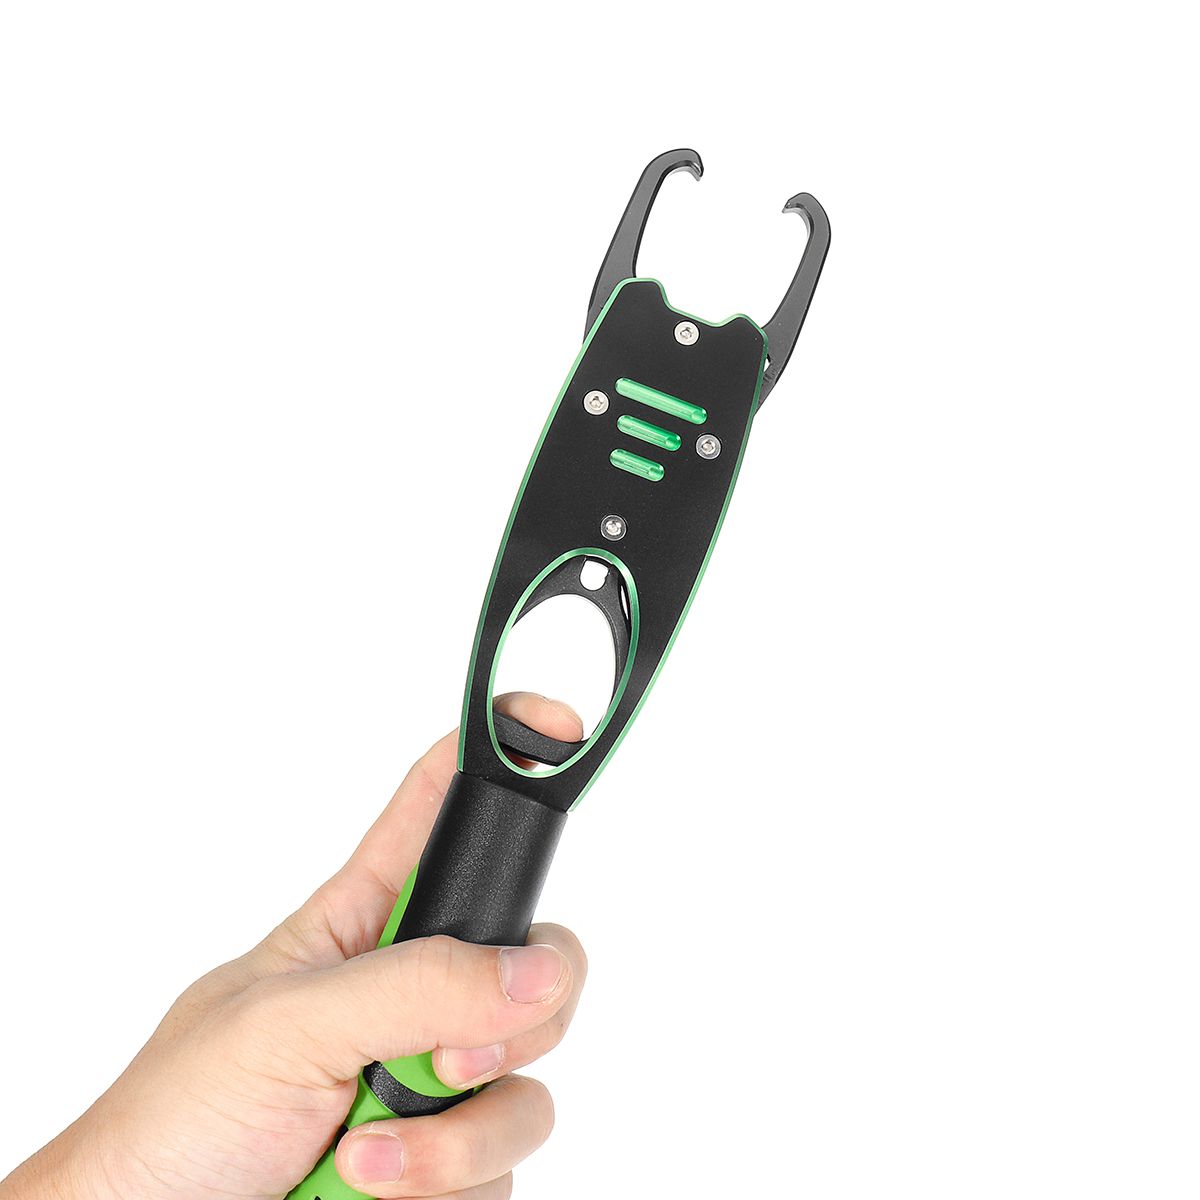 Portable-Aluminum-Alloy-Fishing-Grip-Fishing-Pliers-Split-Ring-Cutters-Line-Hook-Recover-Fishing-Tac-1586129